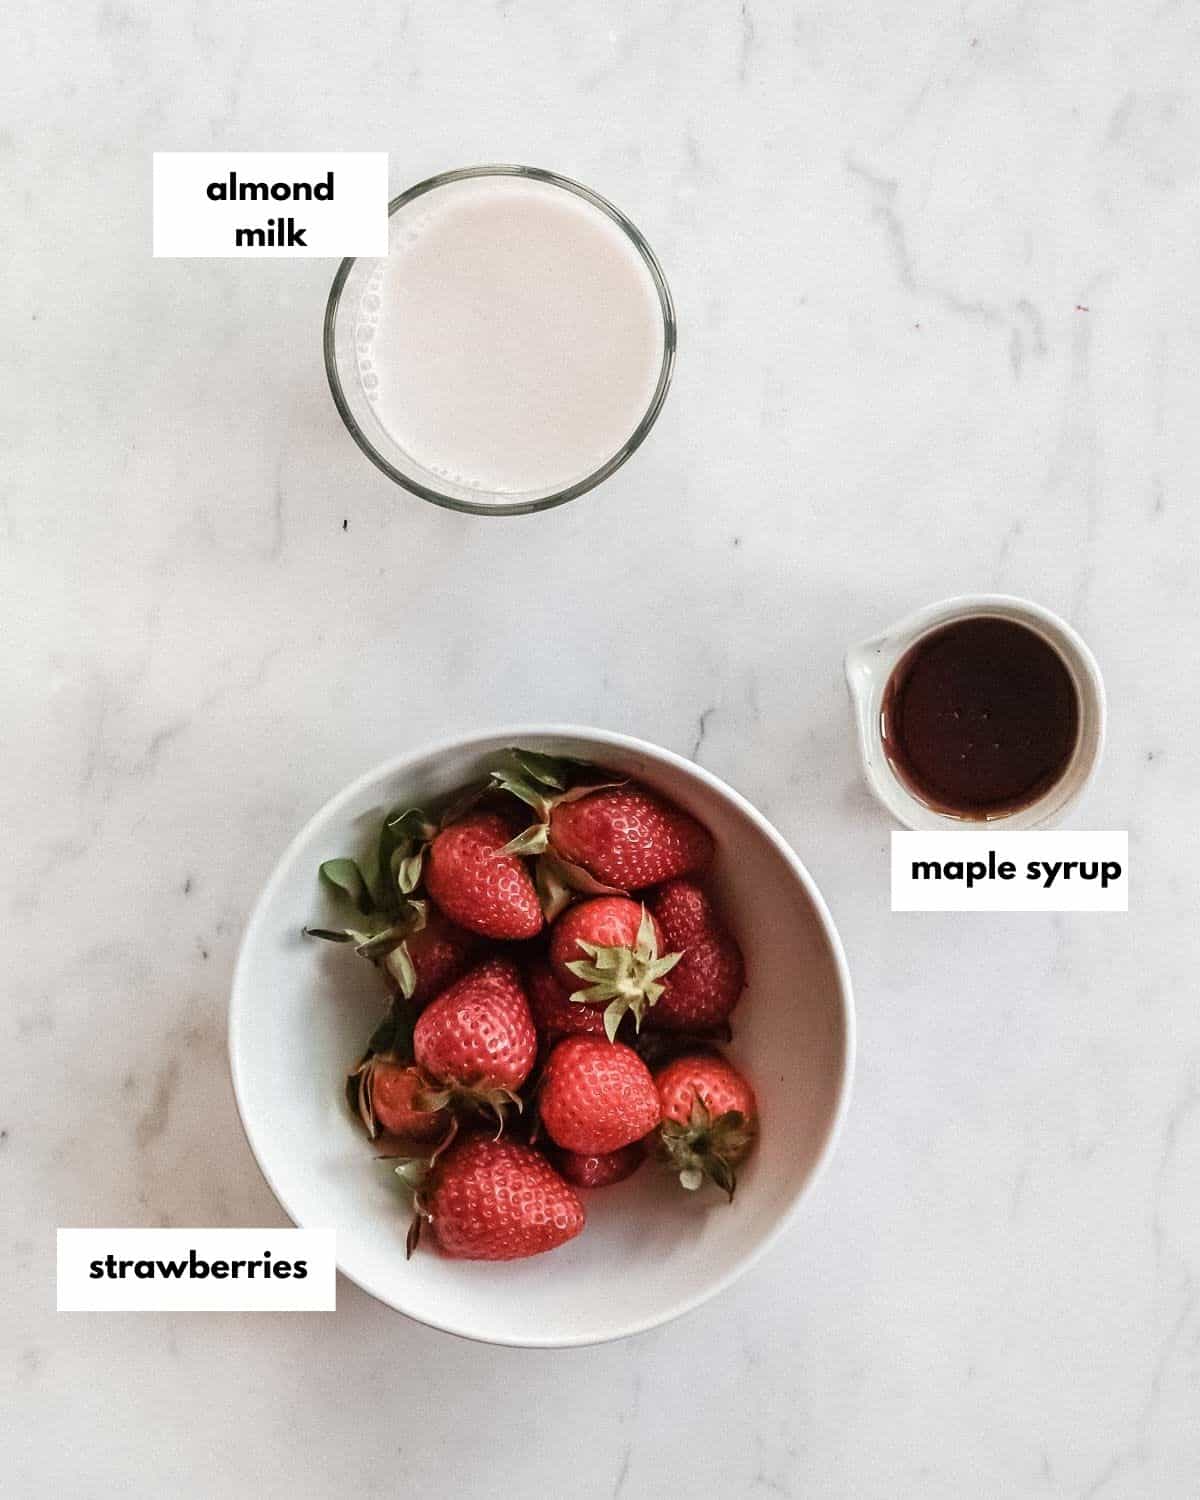 all ingredients needed to make strawberry almond milk.